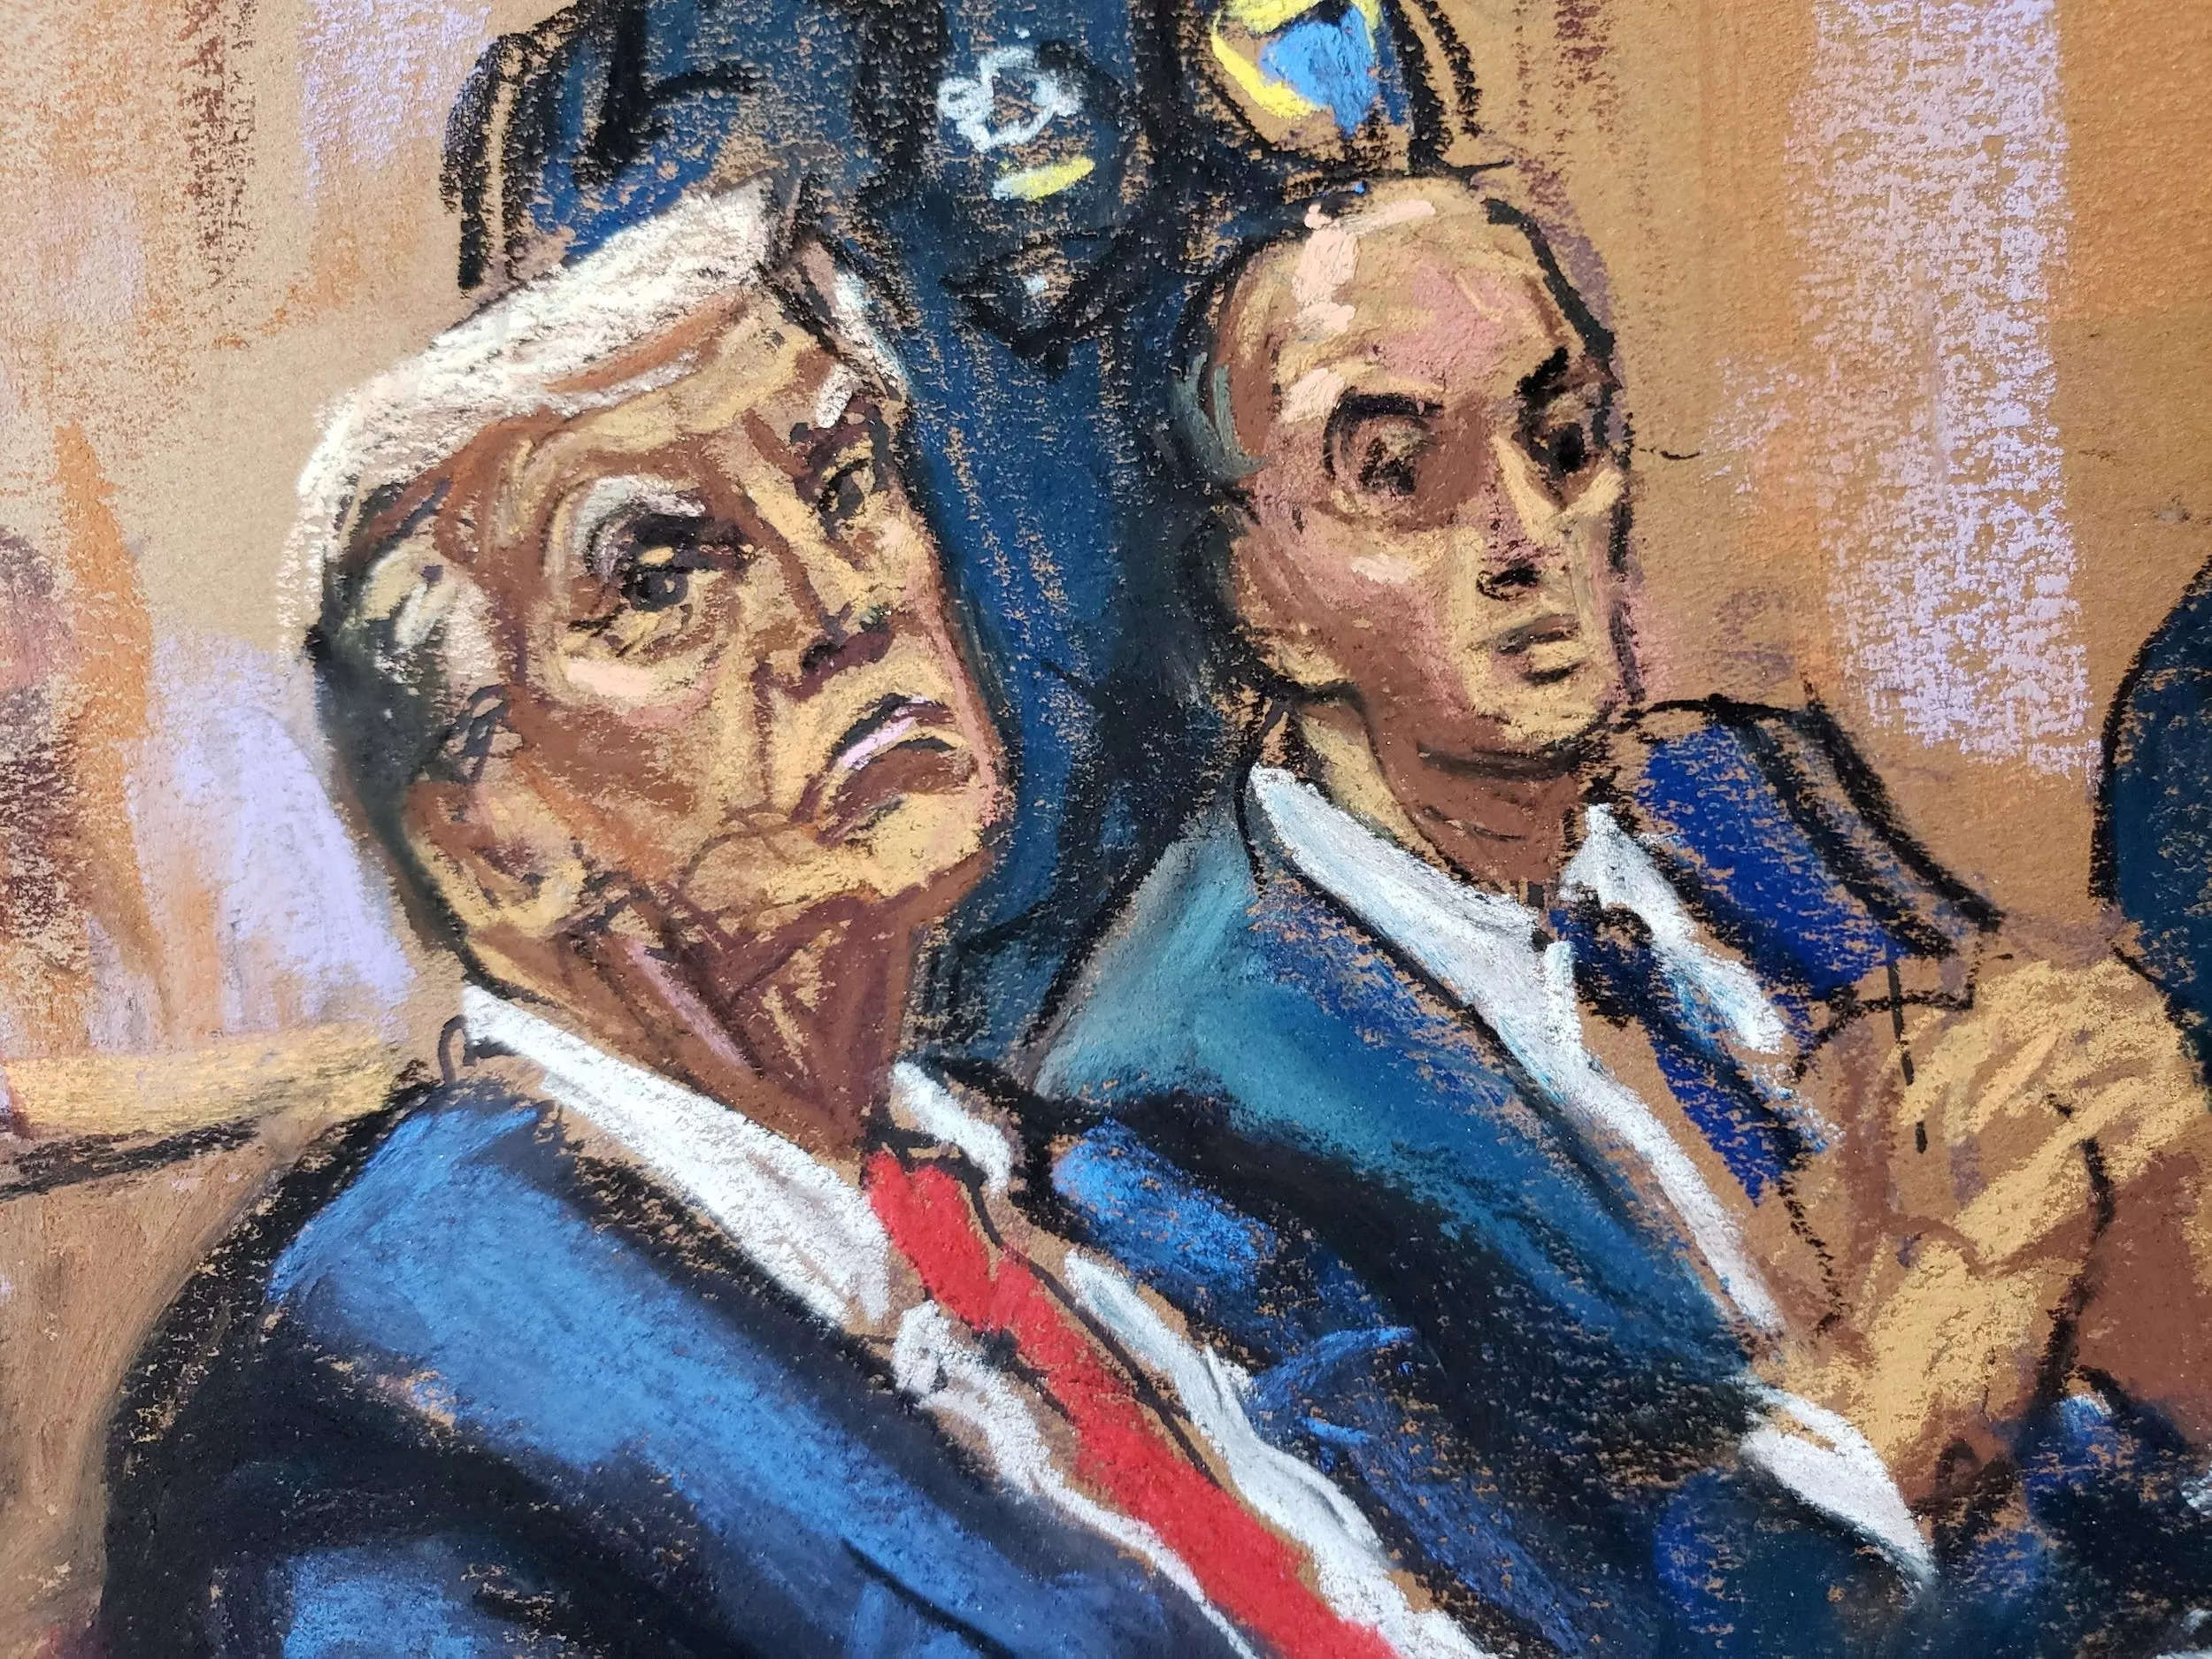 A court sketch shows Donald Trump sitting in court alongside Emil Bove.